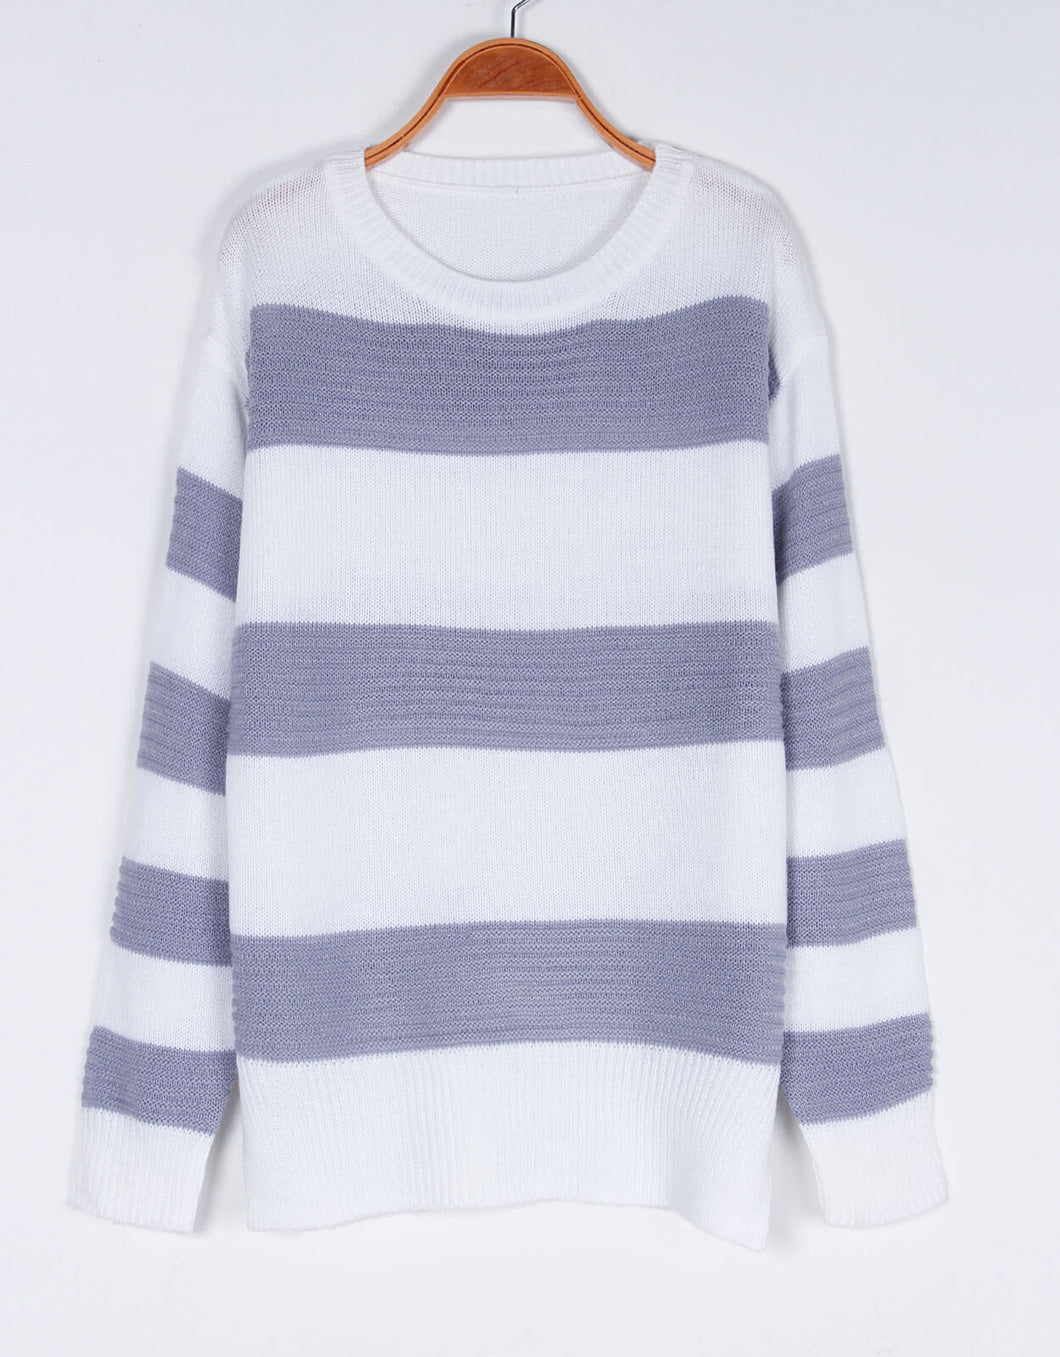 Concise Striped Knitted Sweater